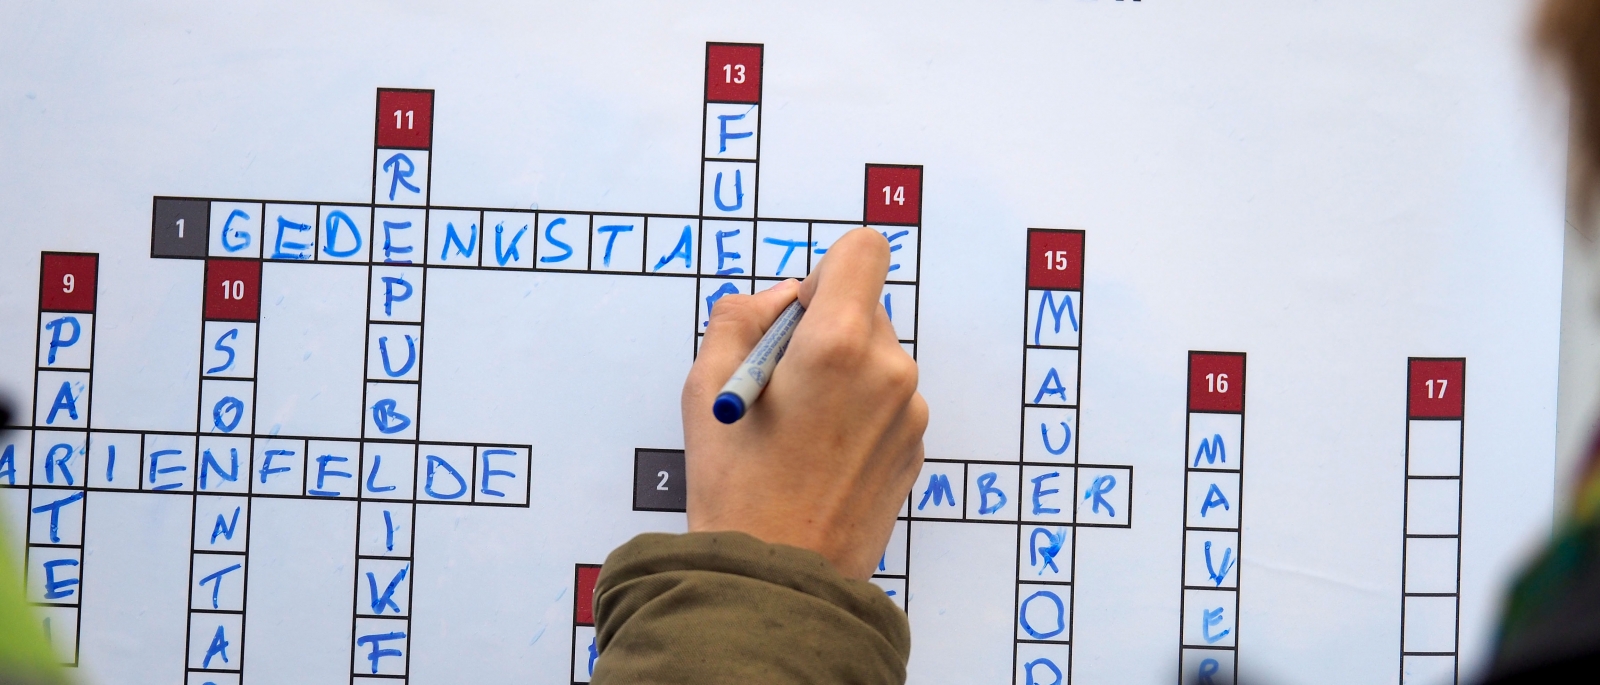 Crossword puzzle about the Foundation